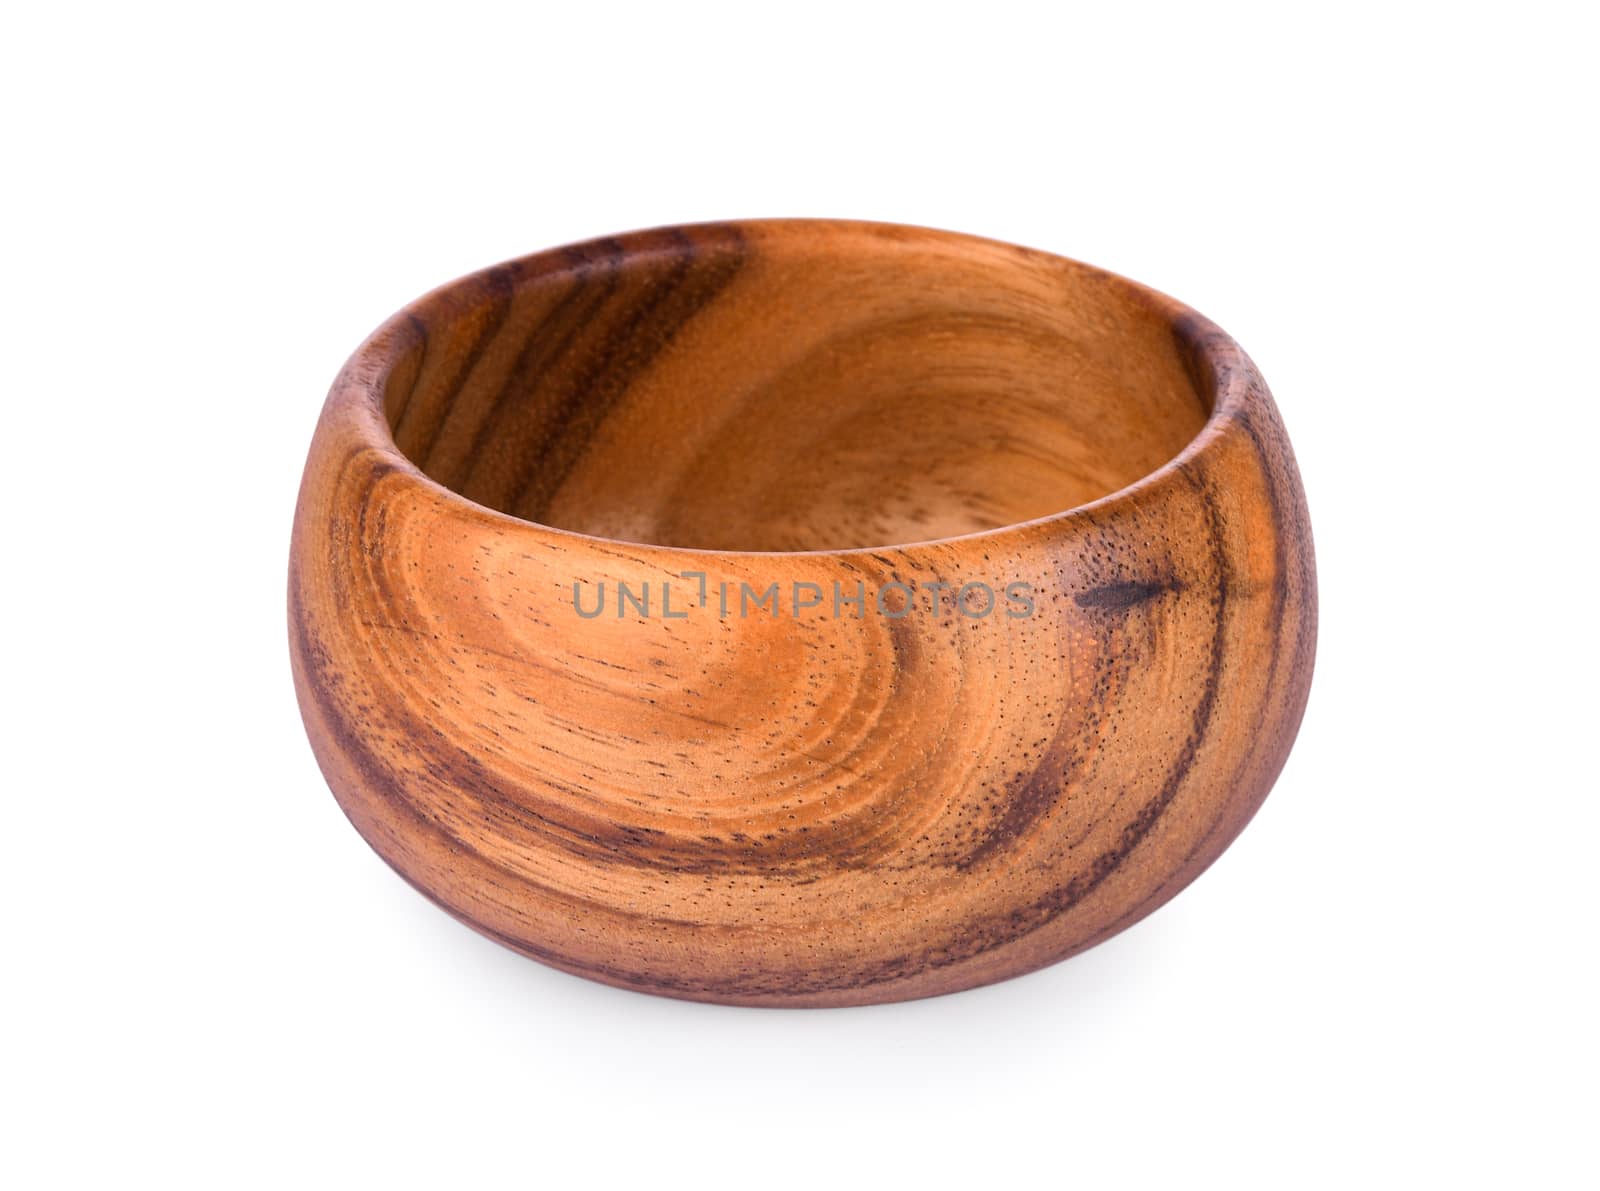 vintage wood bowl isolated on white background by sommai